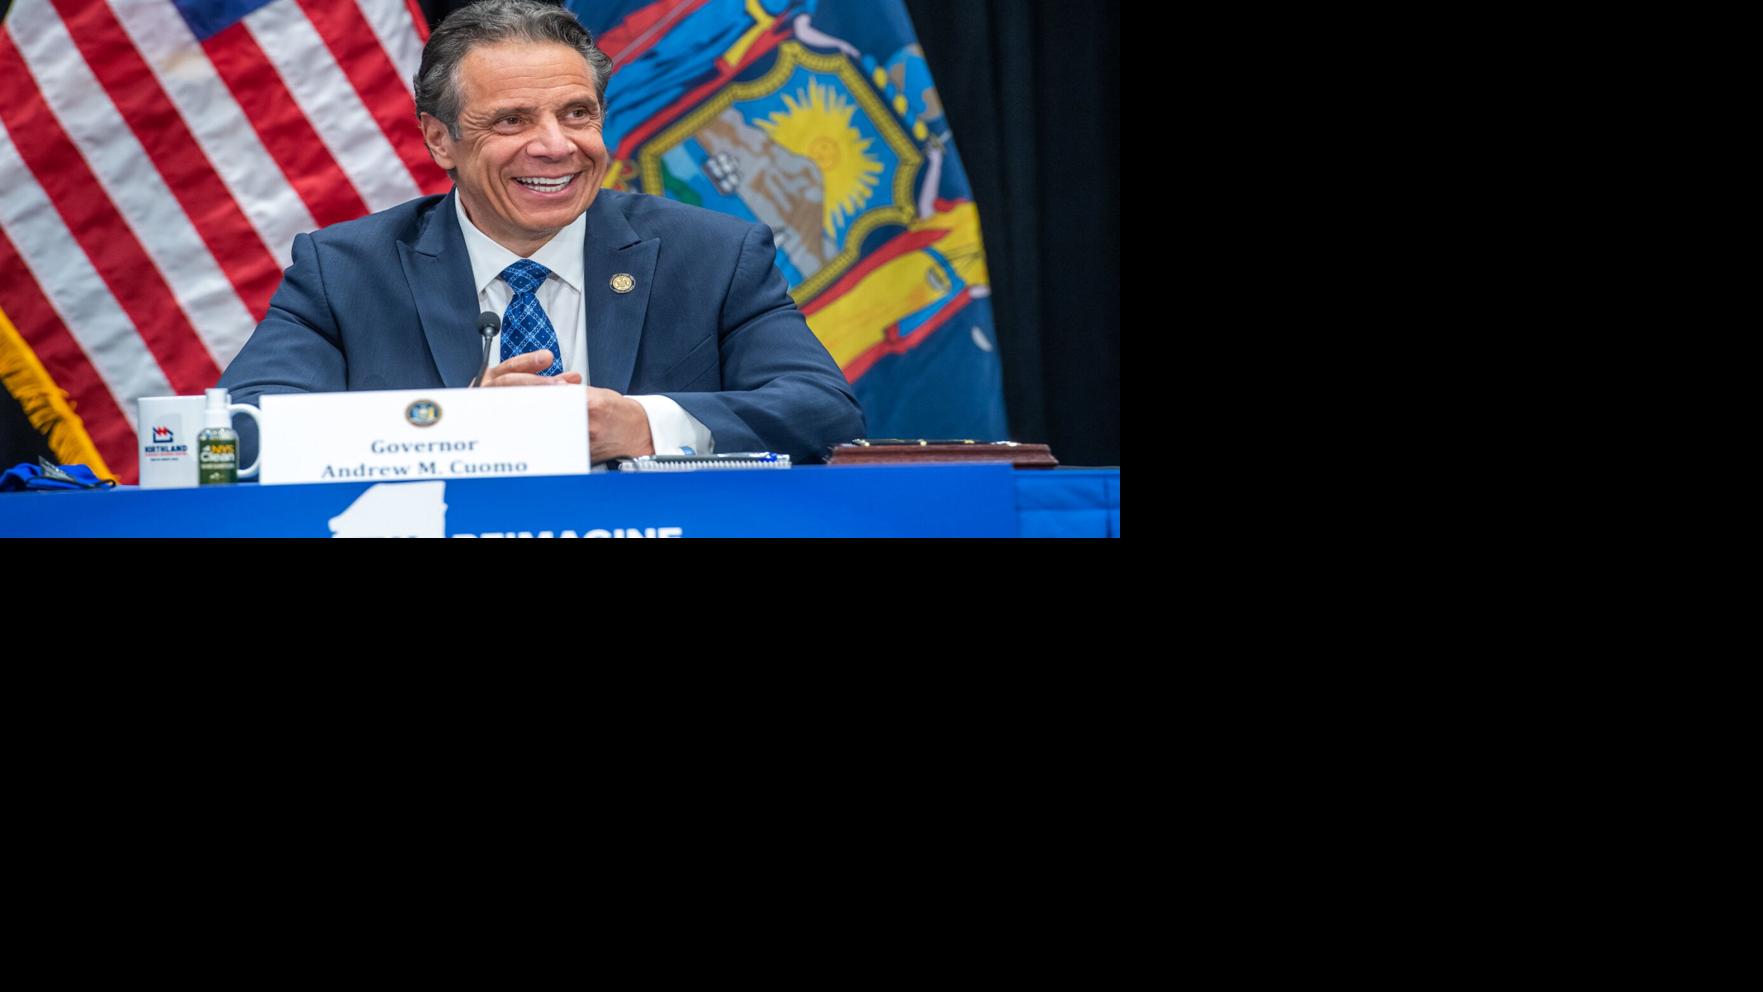 Siena College poll shows Cuomo's favorability dropping ...